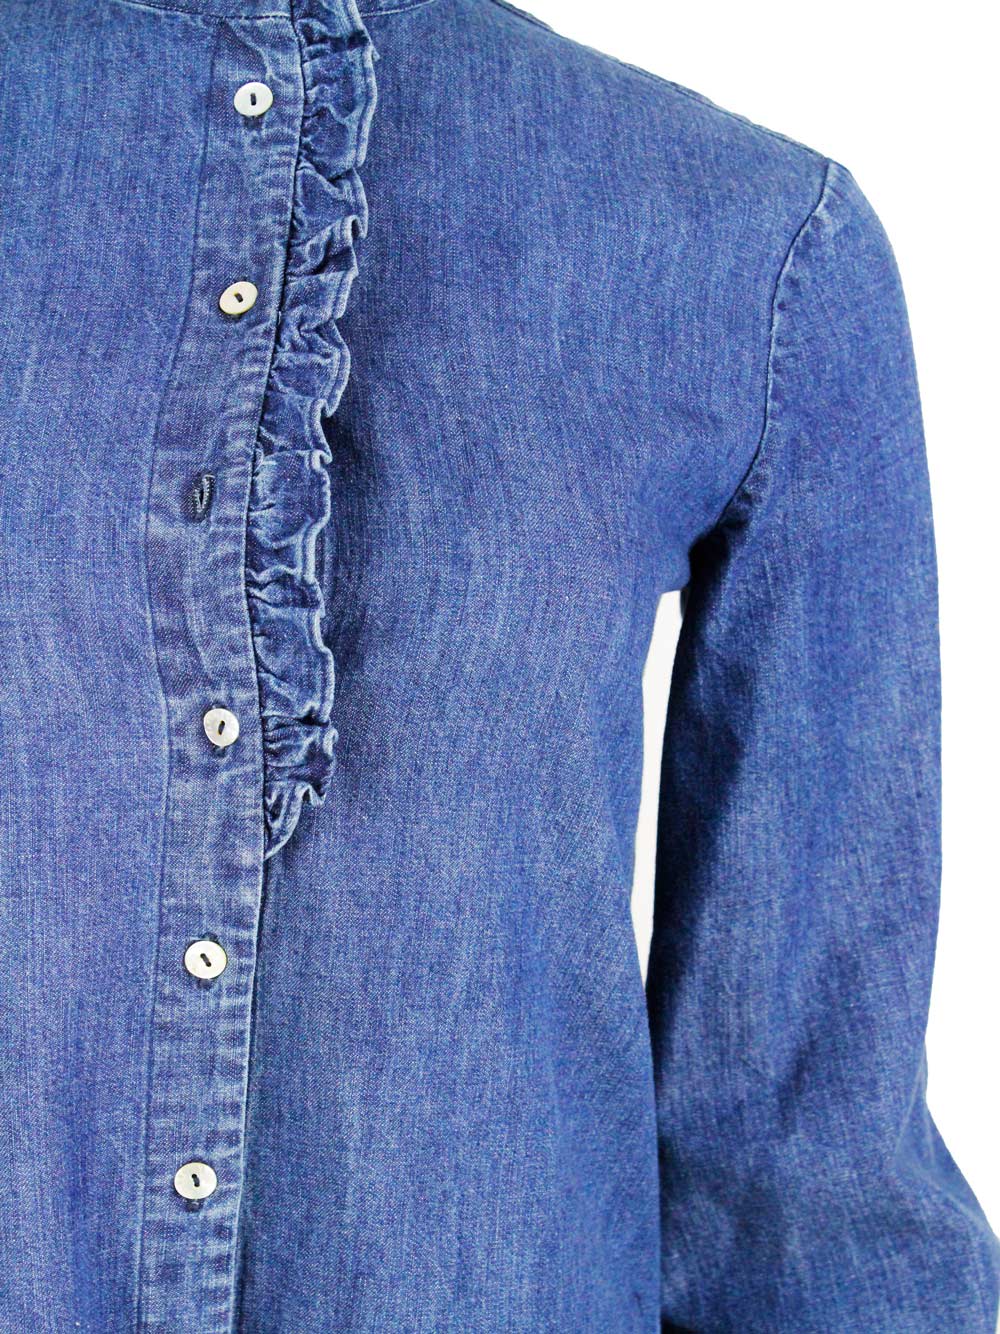 Shop Barba Napoli Long-sleeved Shirt In Fine Denim Embellished With Rouges On The Collar And Along The Buttons. Regula